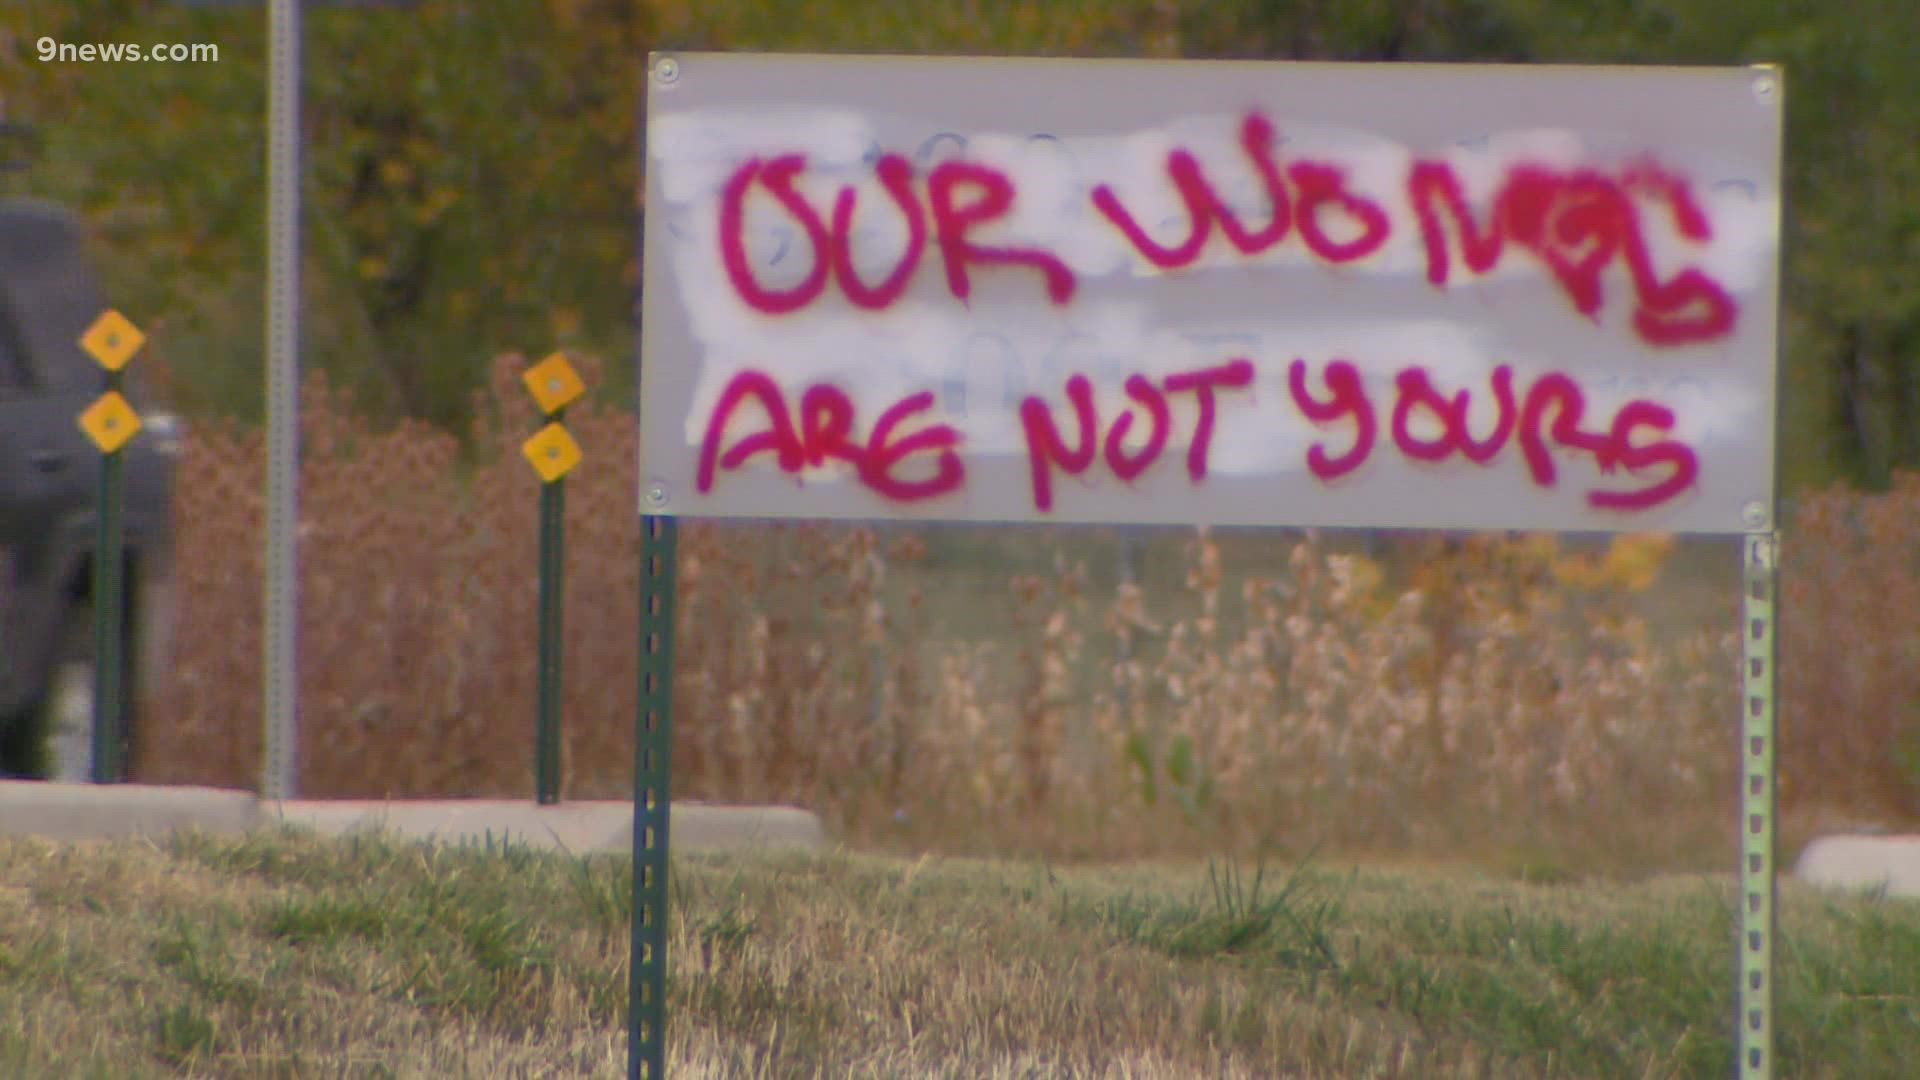 The Boulder County Sheriff's Office is investigating. Much of the graffiti read messages about abortion and being pro-choice.